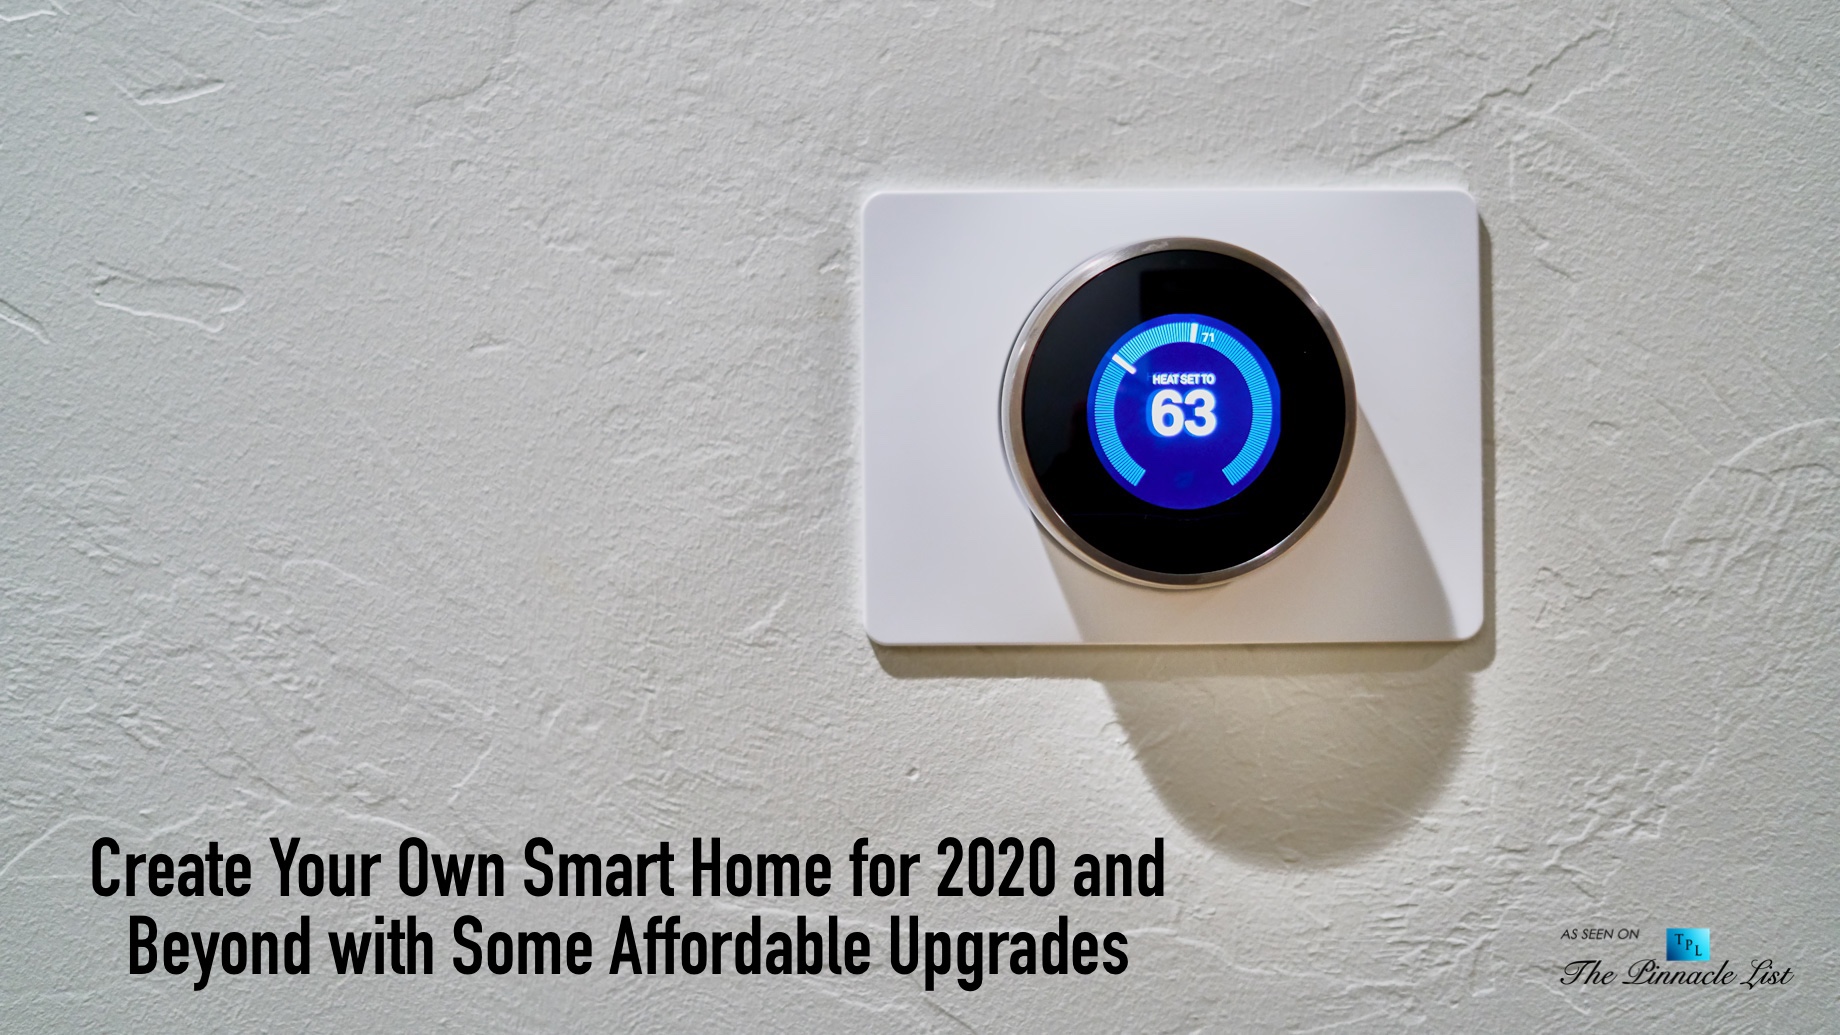 Create Your Own Smart Home for 2020 and Beyond with Some Affordable Upgrades